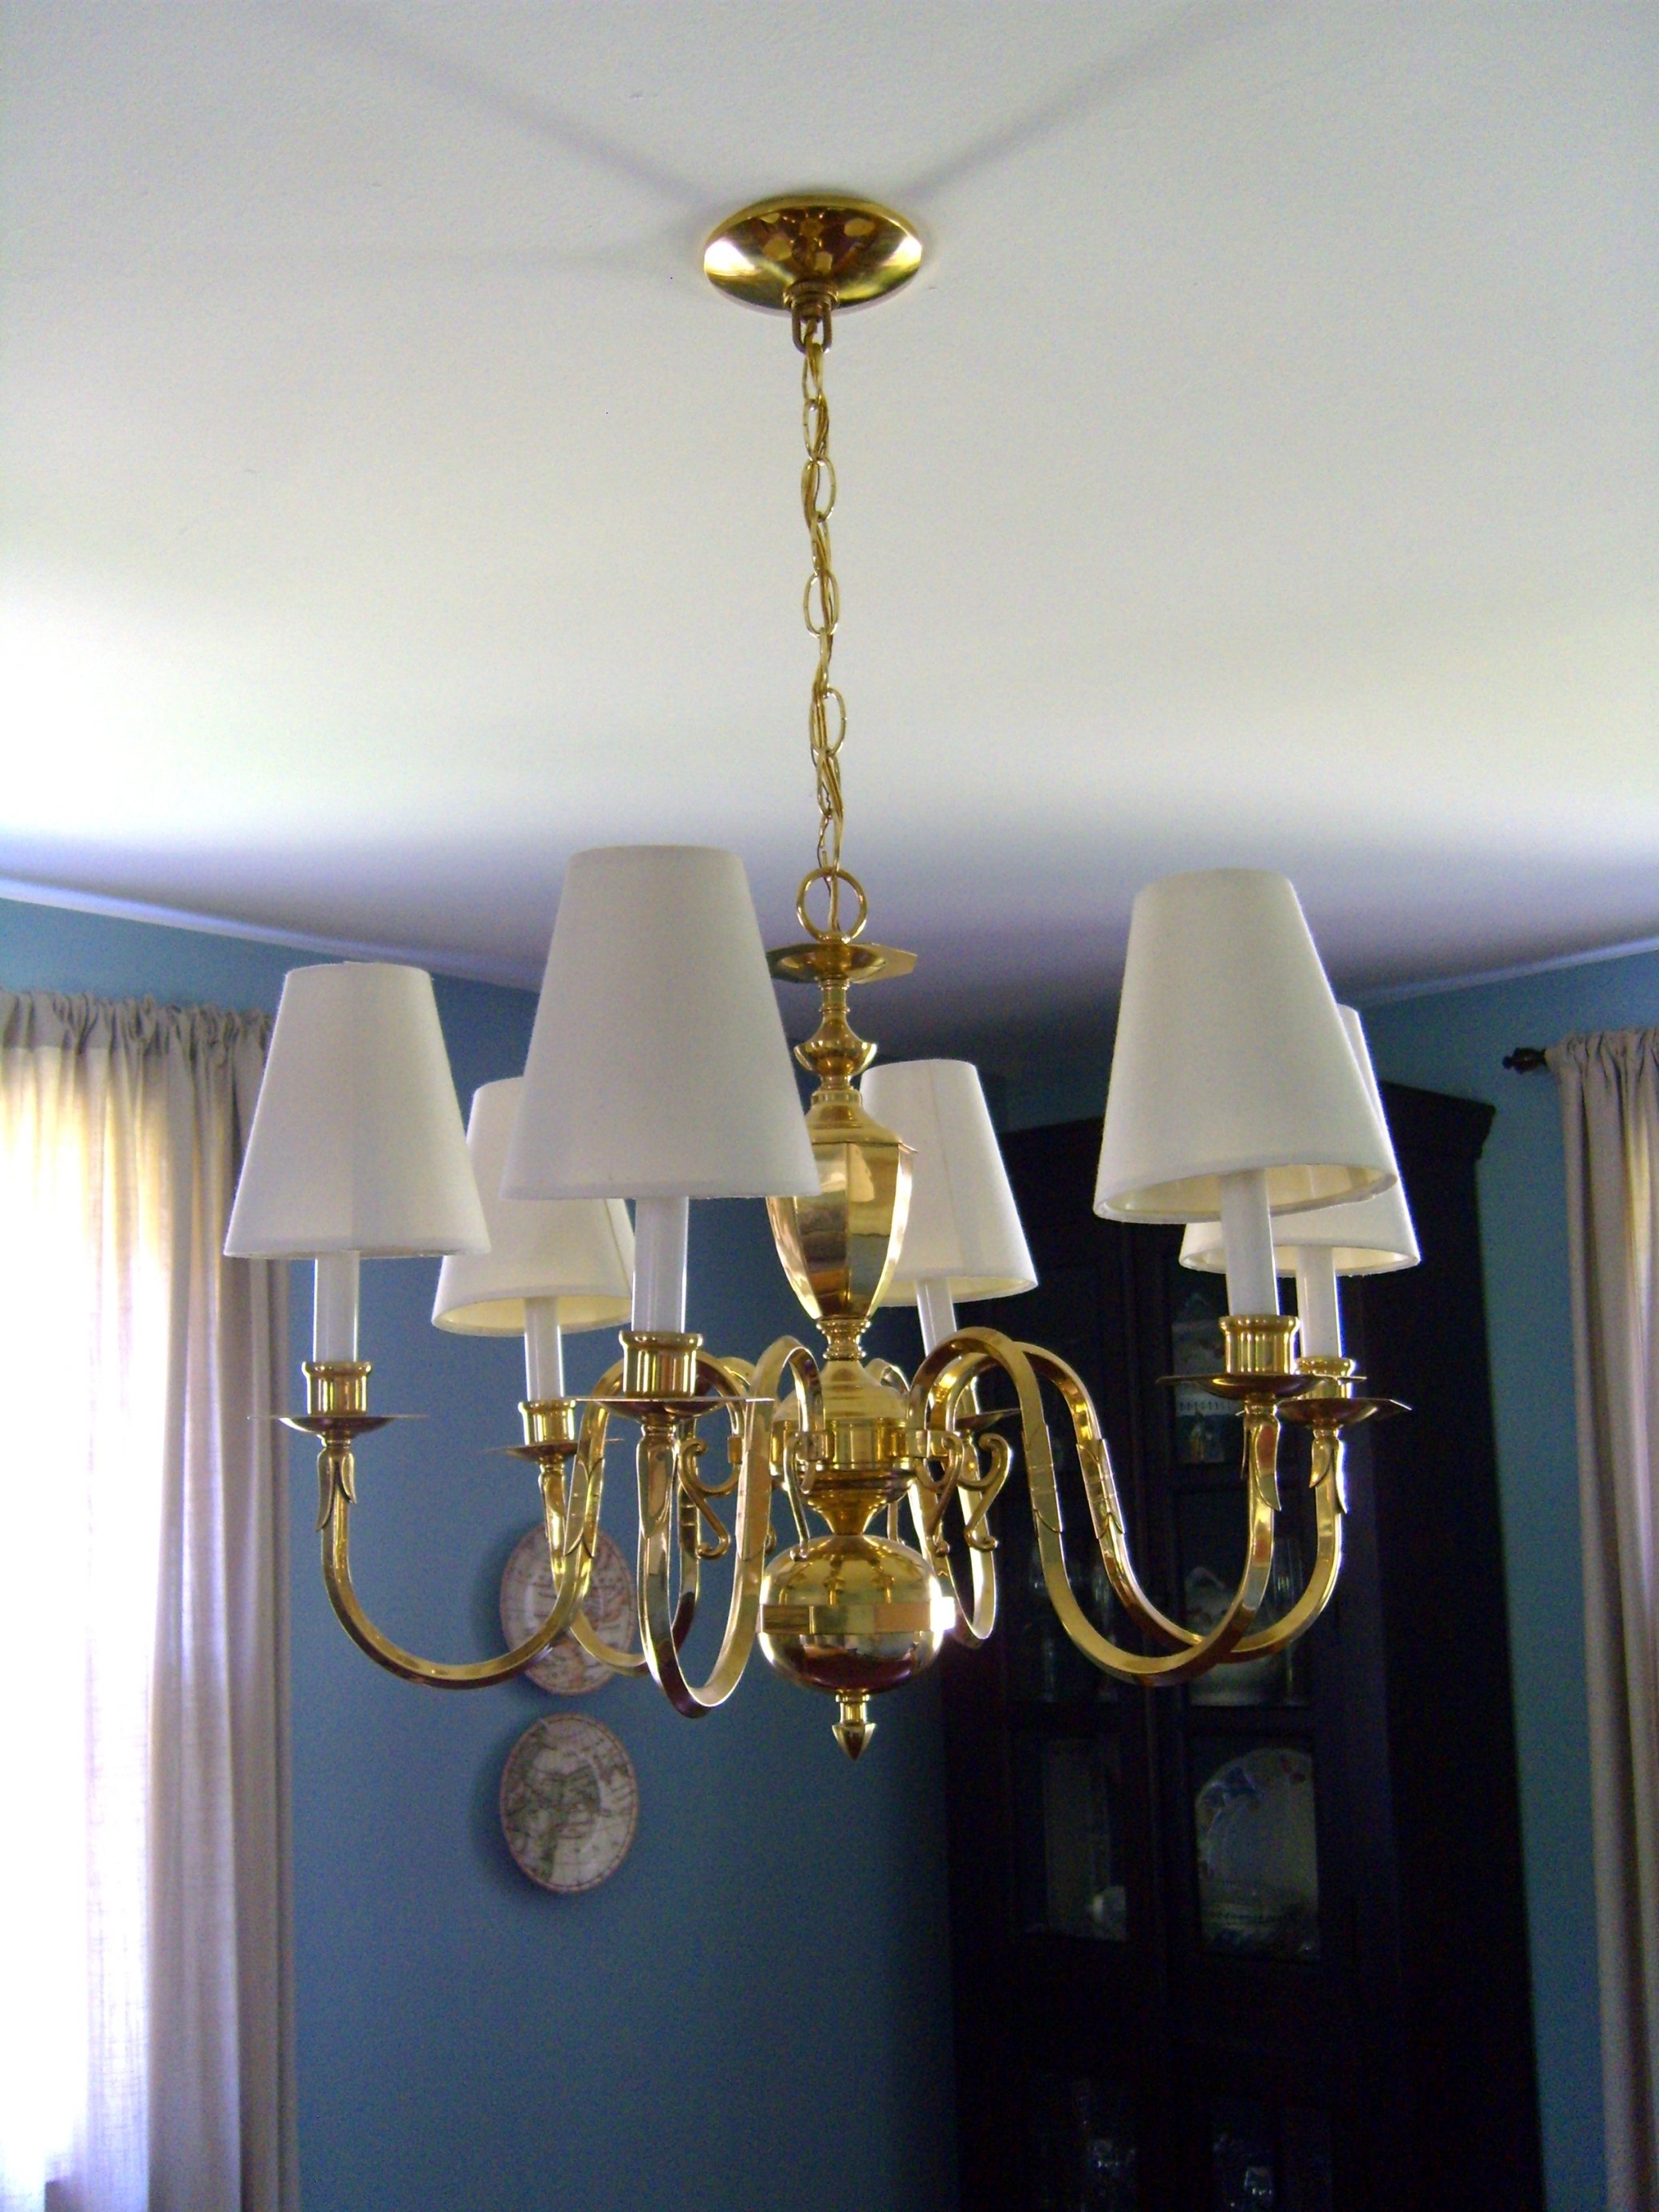 Selected photo of small chandelier lampshades